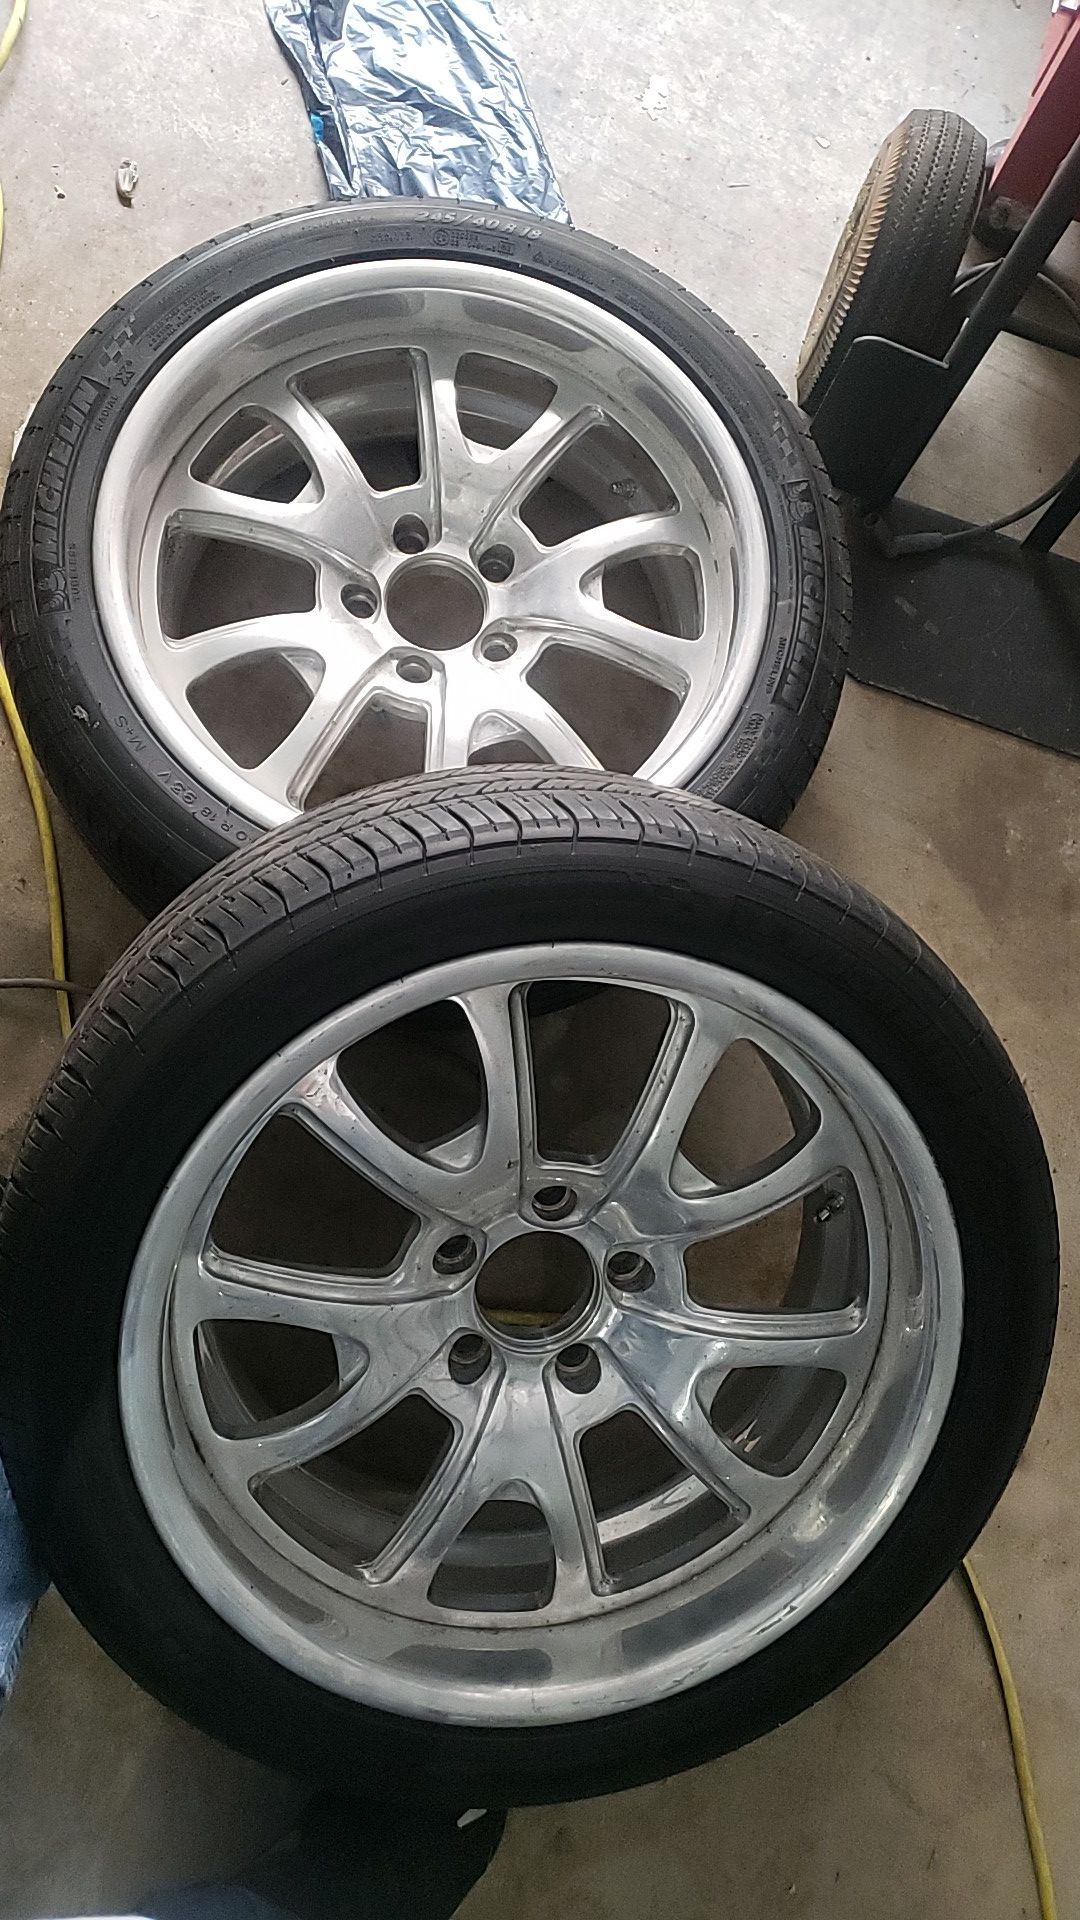 2 18inch tires comes with rims